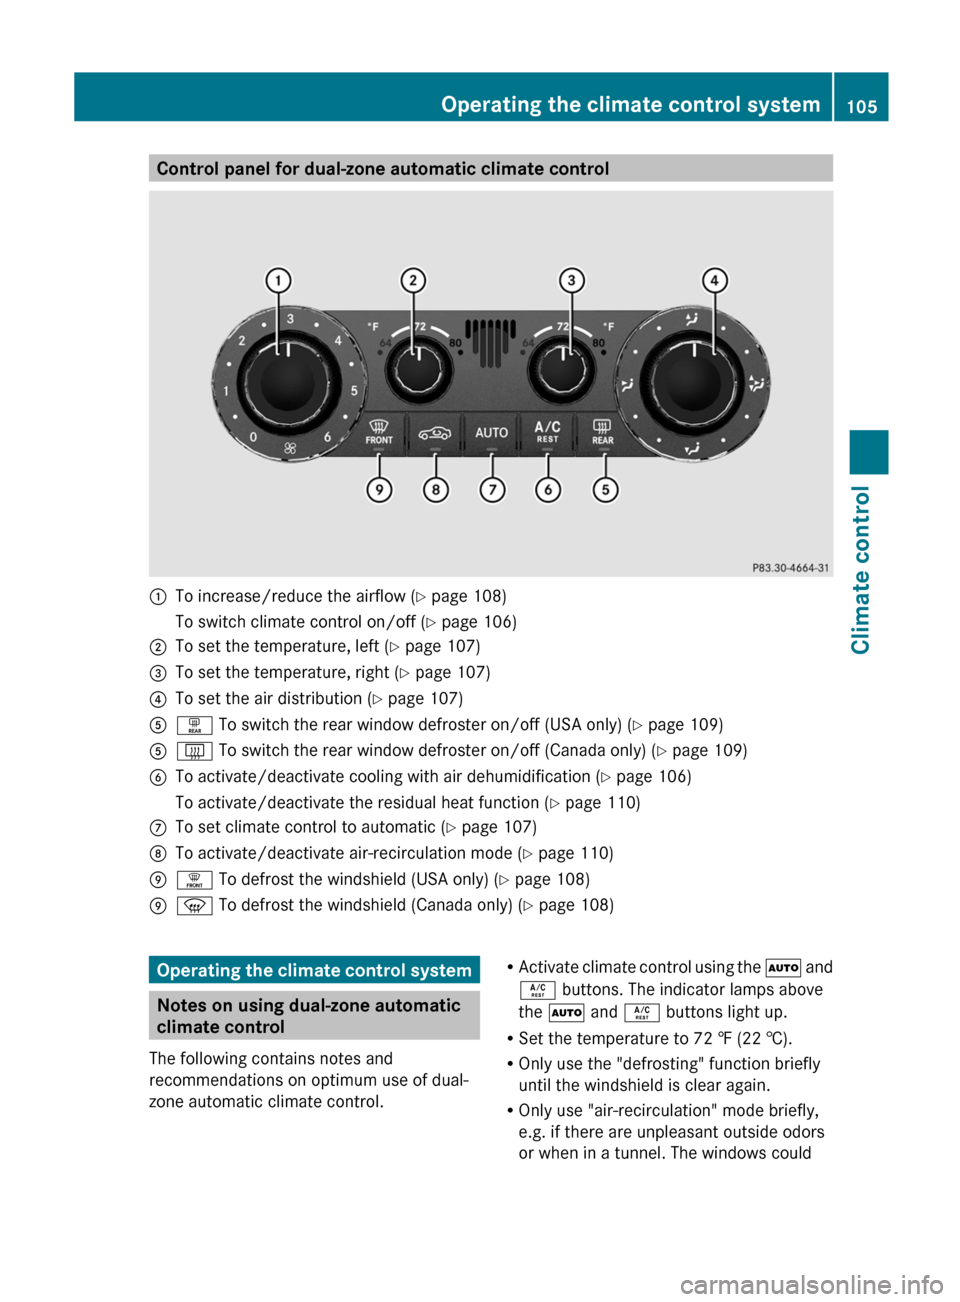 MERCEDES-BENZ G-Class 2012 W463 Owners Manual Control panel for dual-zone automatic climate control
:
To increase/reduce the airflow  (
Y page 108)
To switch climate control on/off (Y page 106)
; To set the temperature, left (Y page 107)
= To set